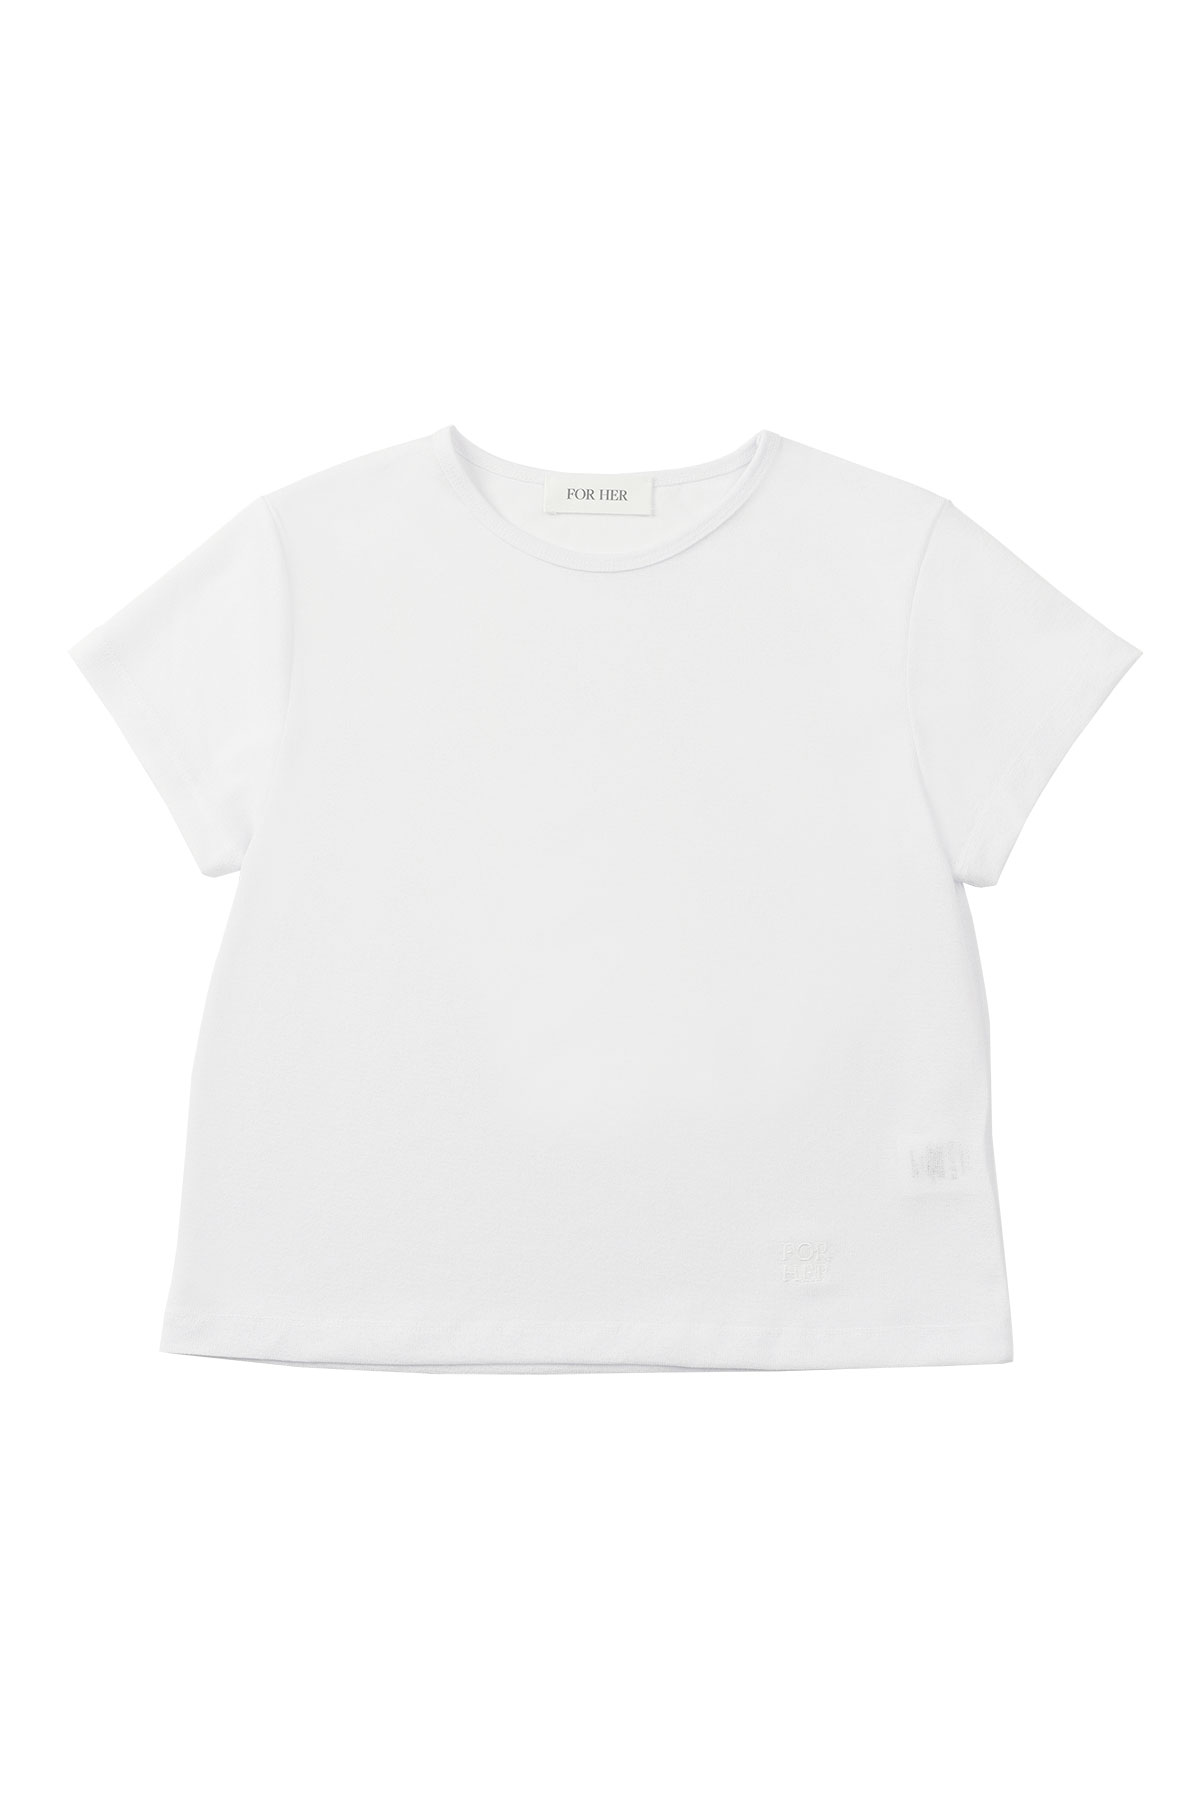 COOLING HALF SLEEVE TOP (WHITE)